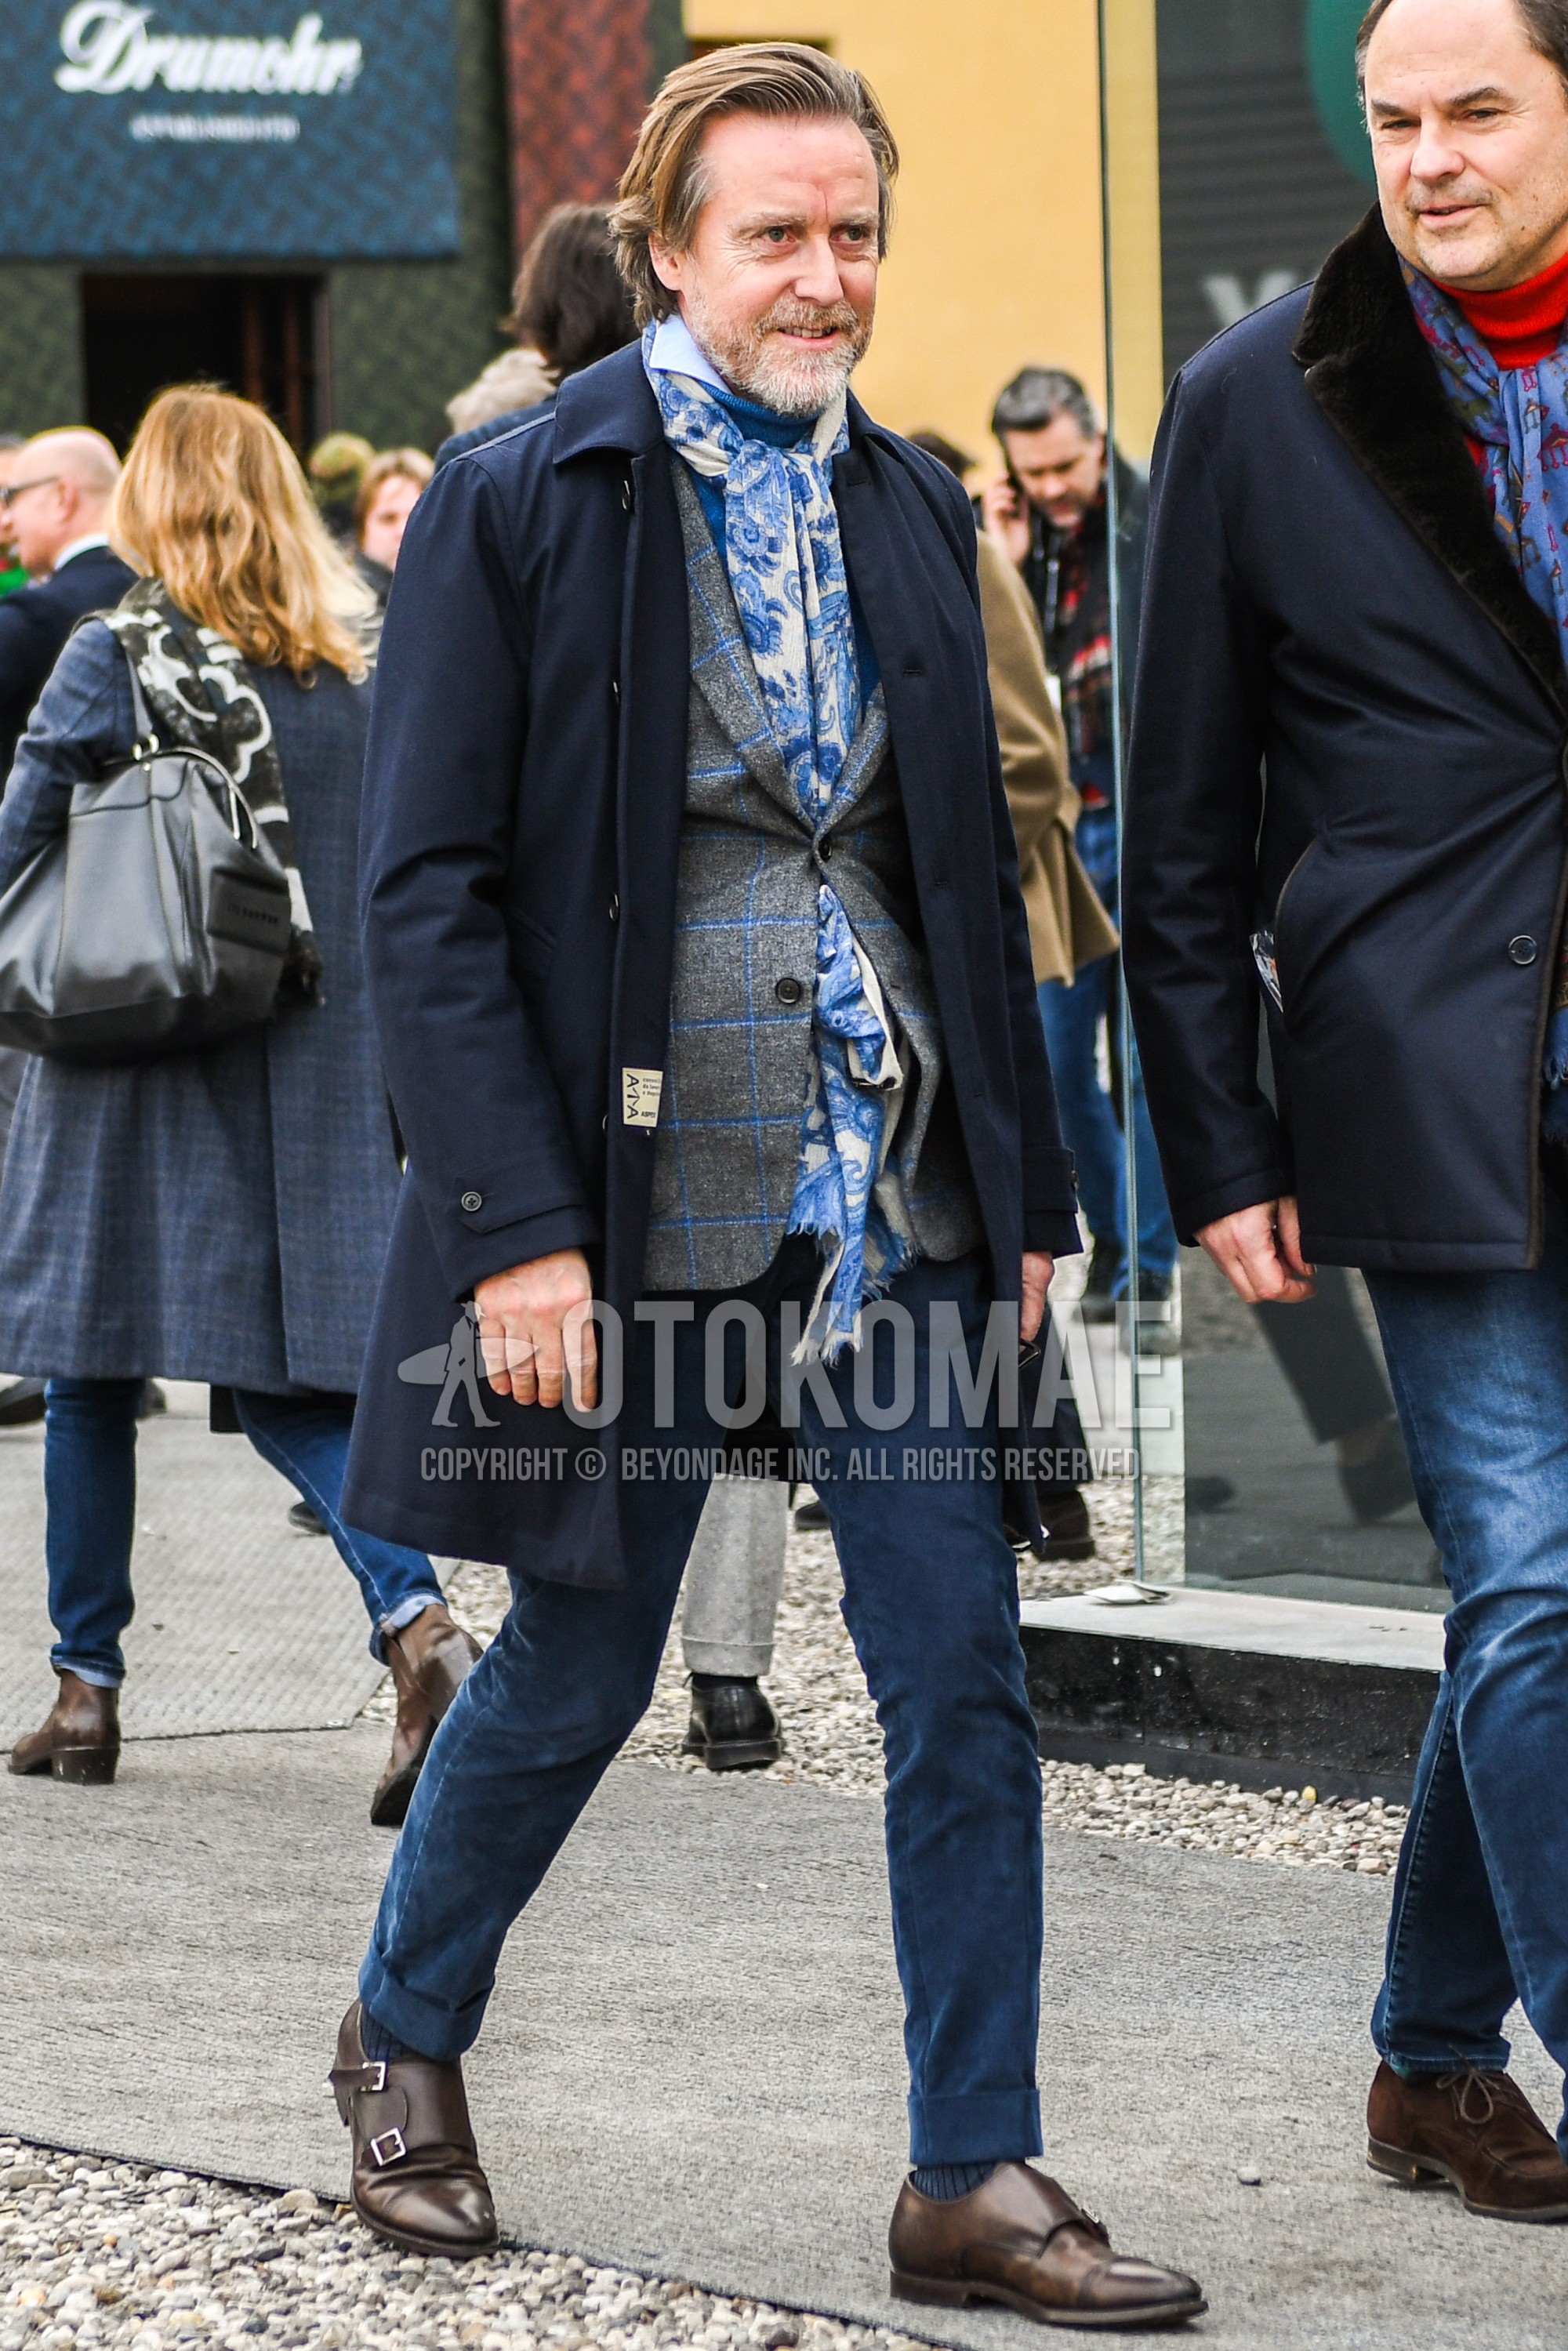 Men's winter outfit with white blue scarf scarf, navy plain stenkarrer coat, blue plain turtleneck knit, gray check tailored jacket, navy plain chinos, gray stripes socks, brown monk shoes leather shoes.